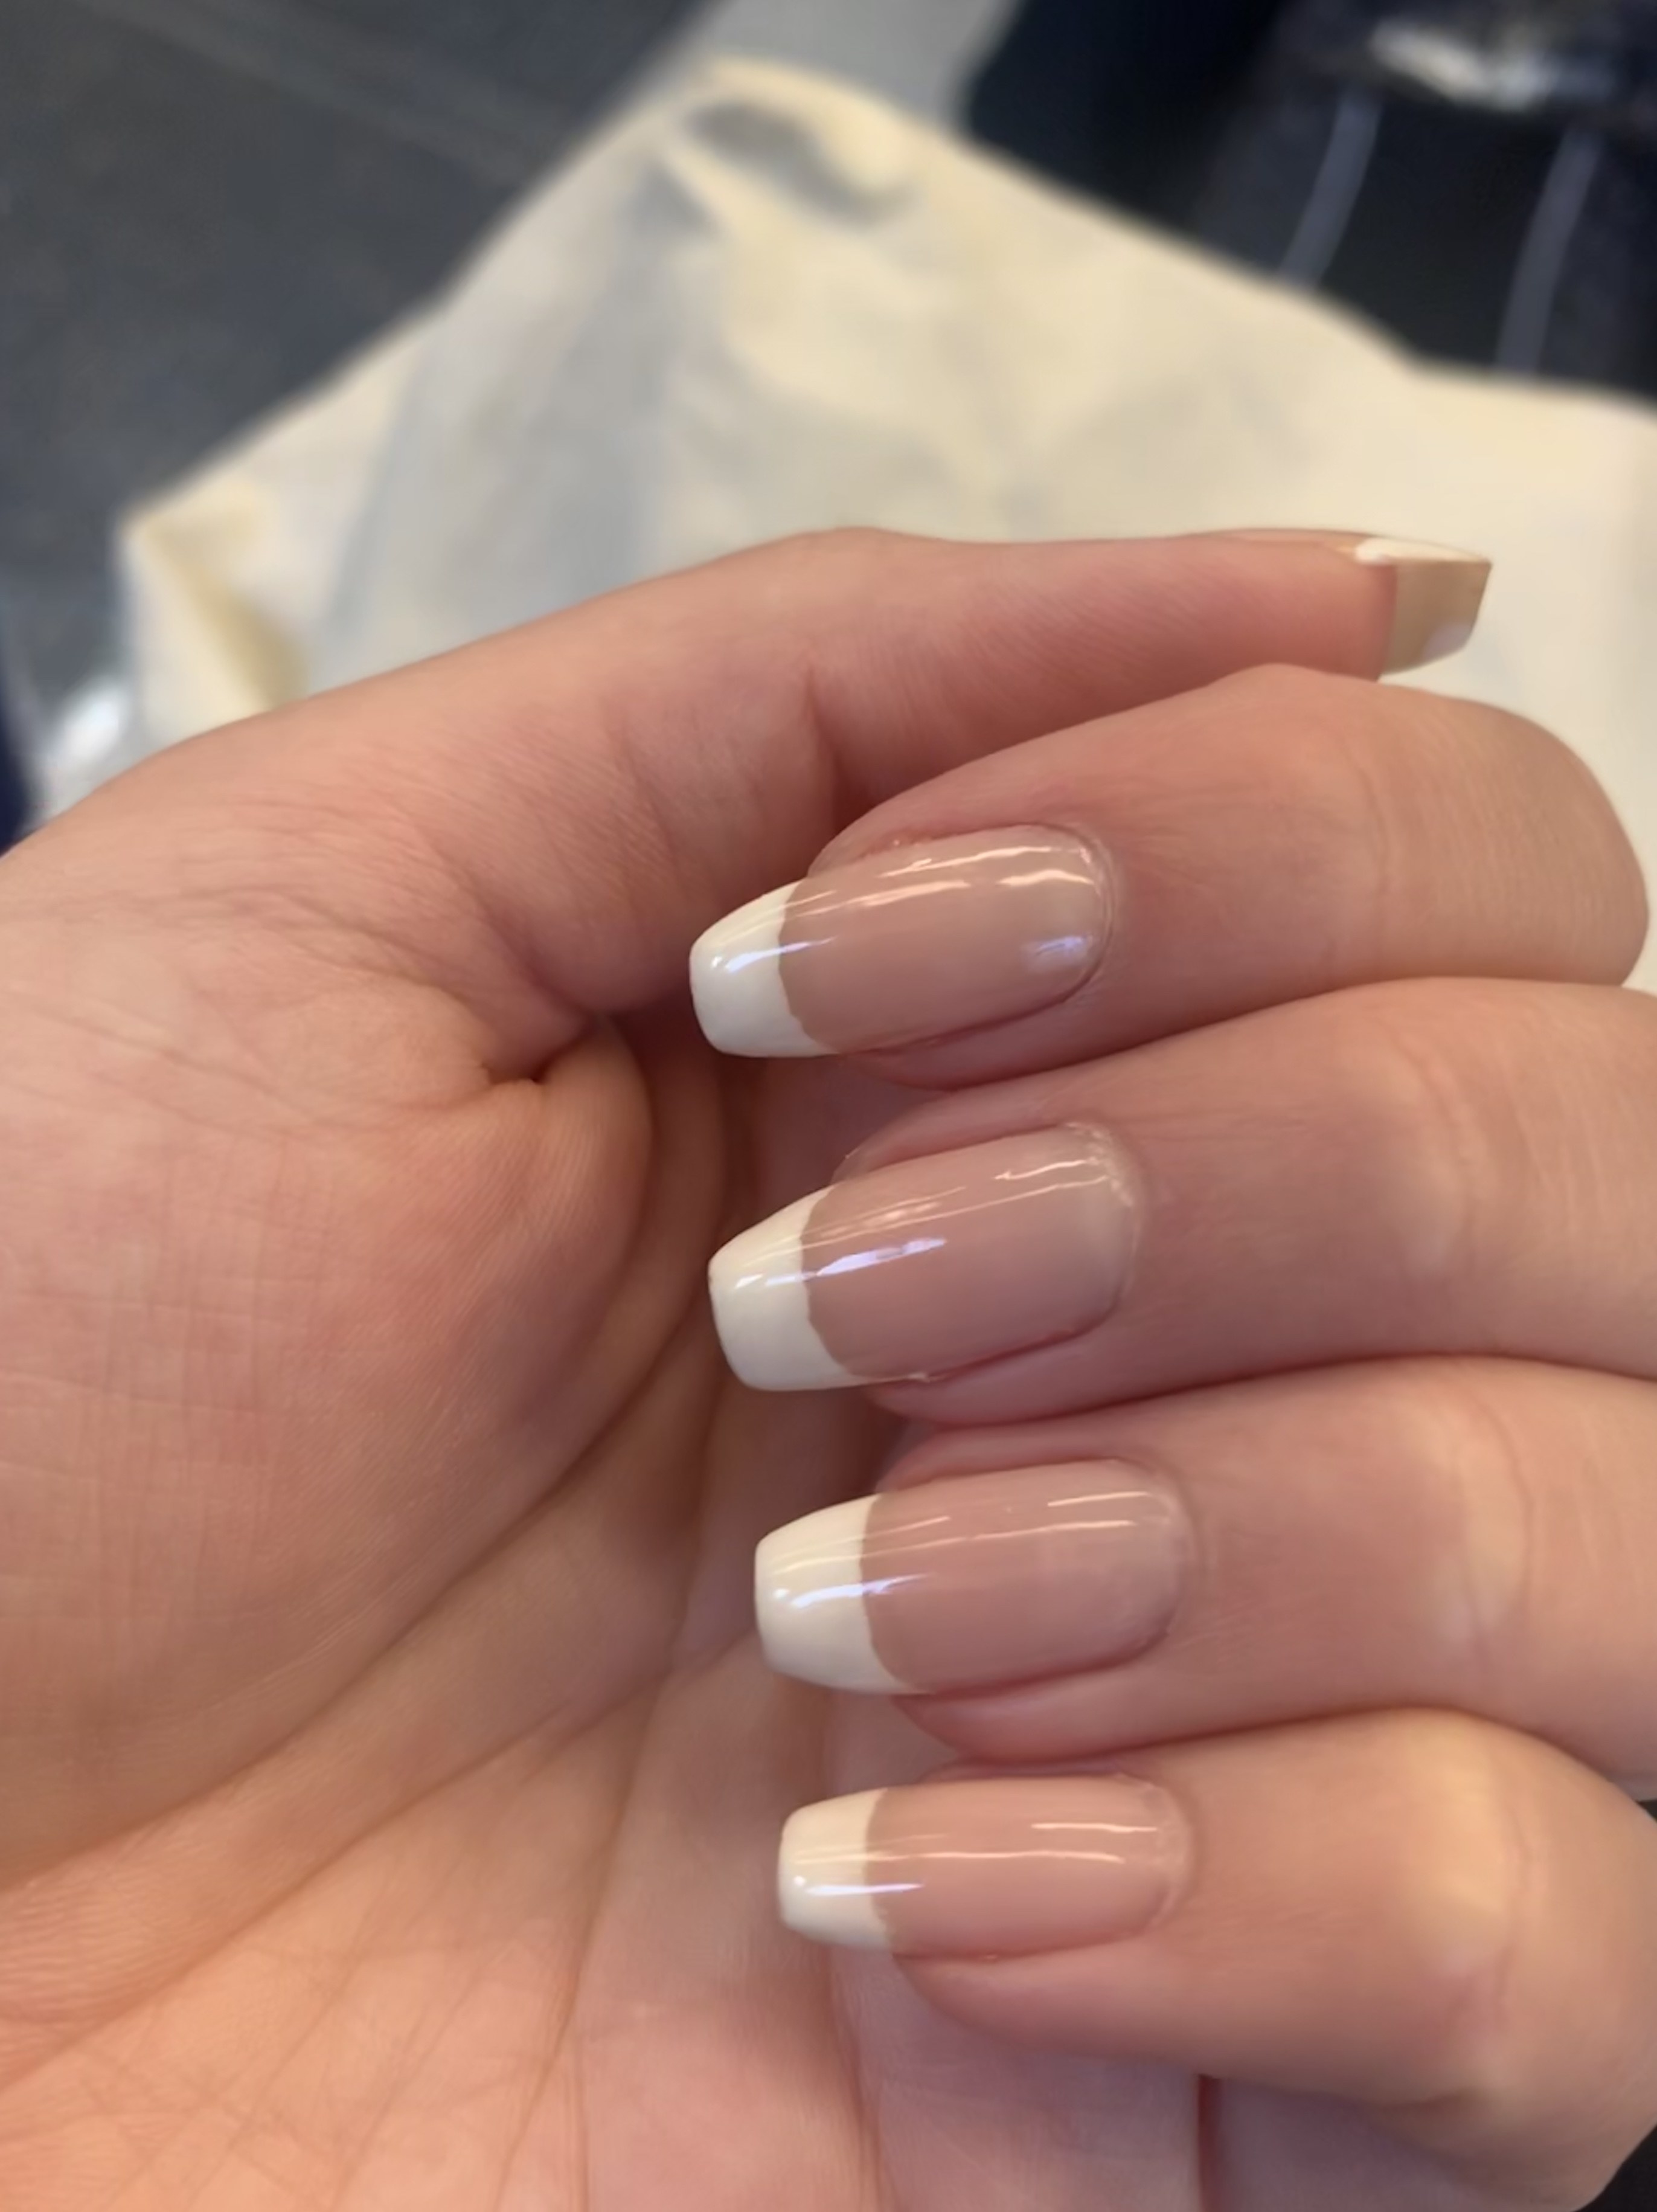 14 Things I Won't Do After Working As A Nail Technician | HuffPost Life